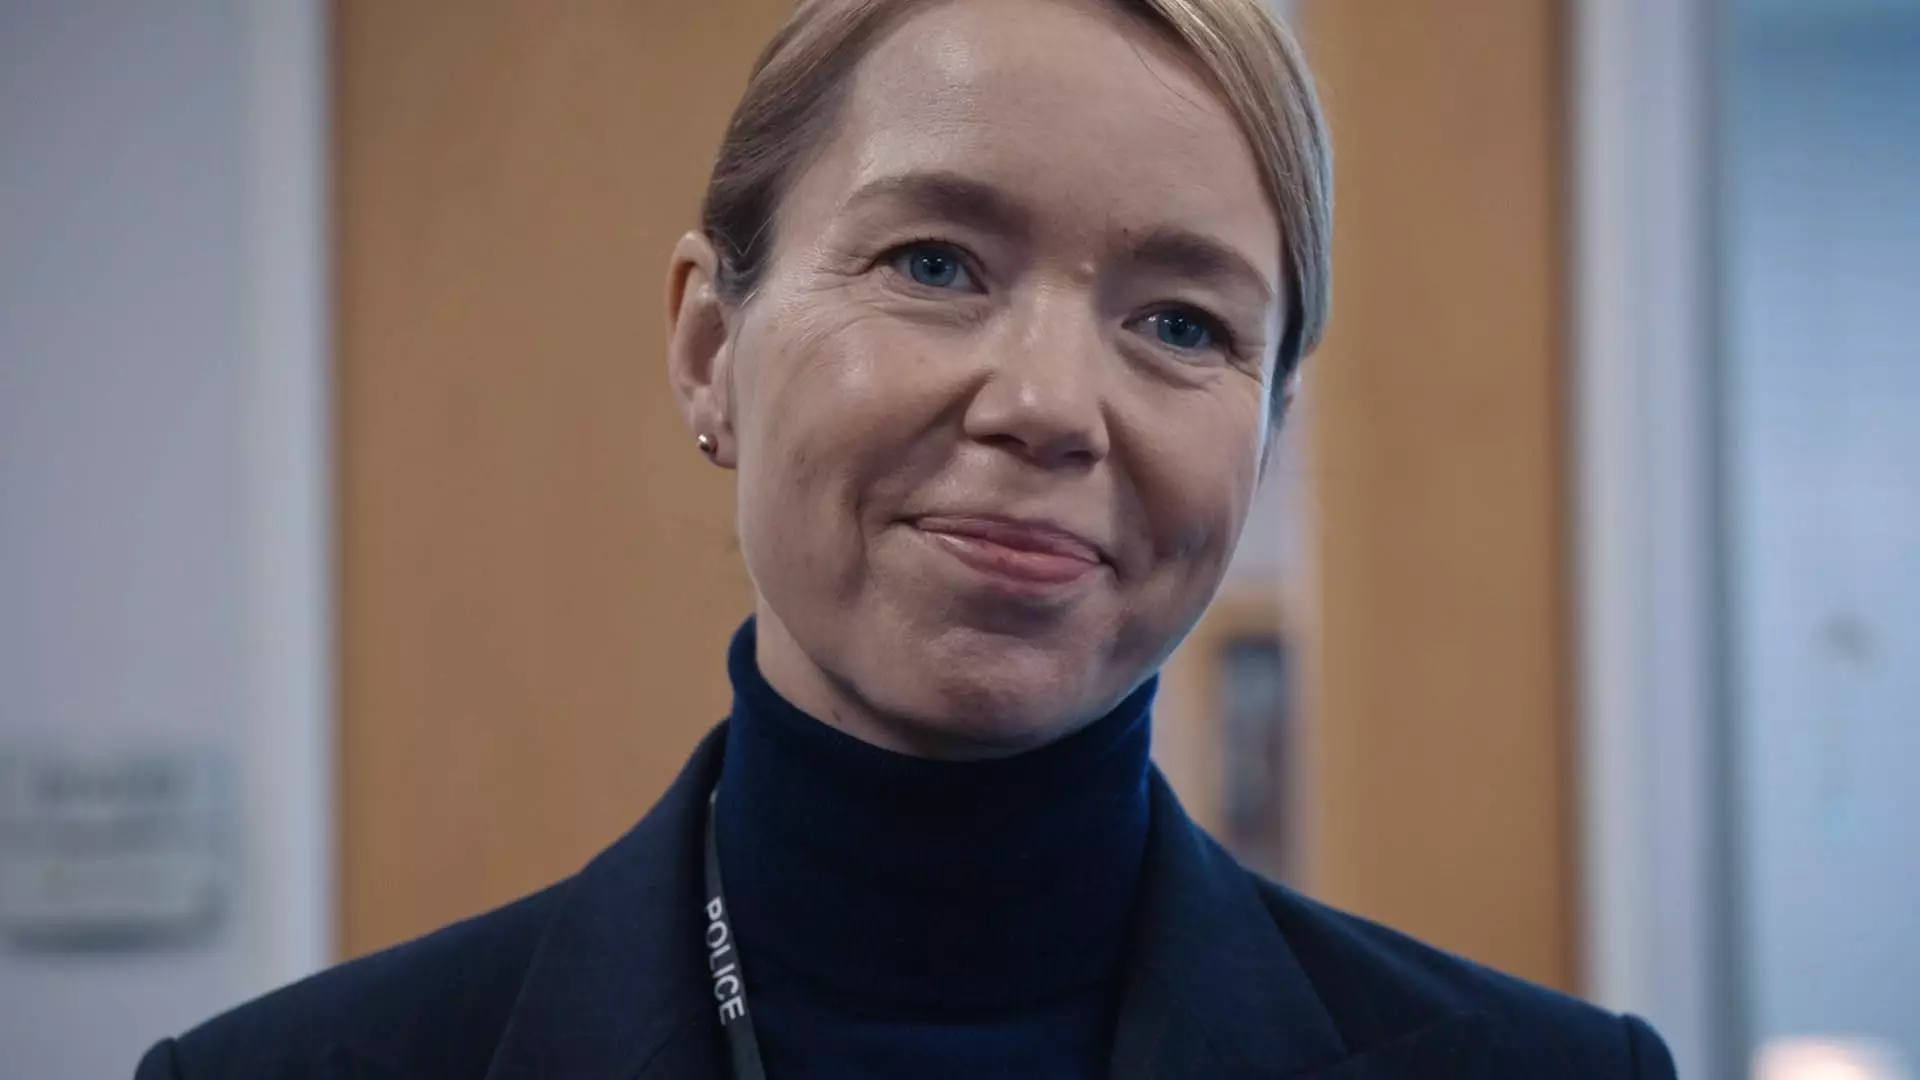 Line of Duty fans are certain Patricia Carmichael is H after spotting a sneaky clue (